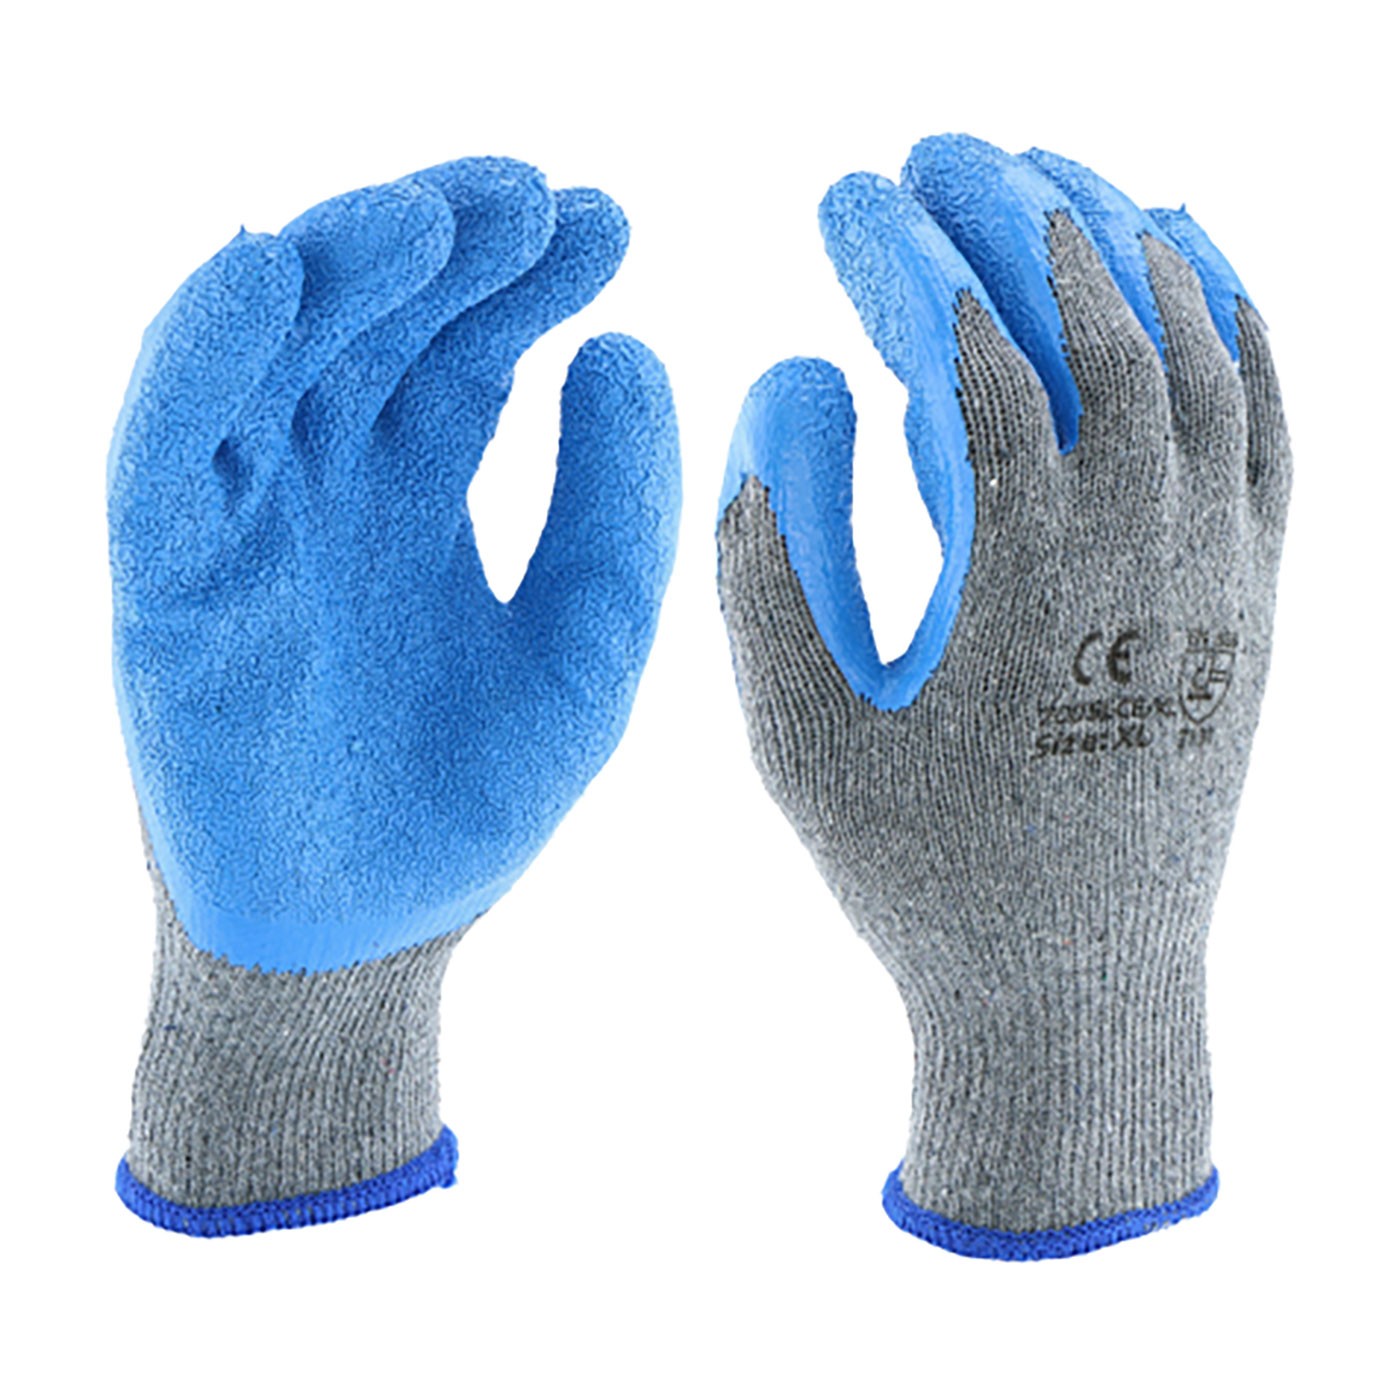 PIP® Seamless Knit Polyester Glove with Latex Coated Crinkle Grip on Palm & Fingers - Regular Grade  (#700SLCE)